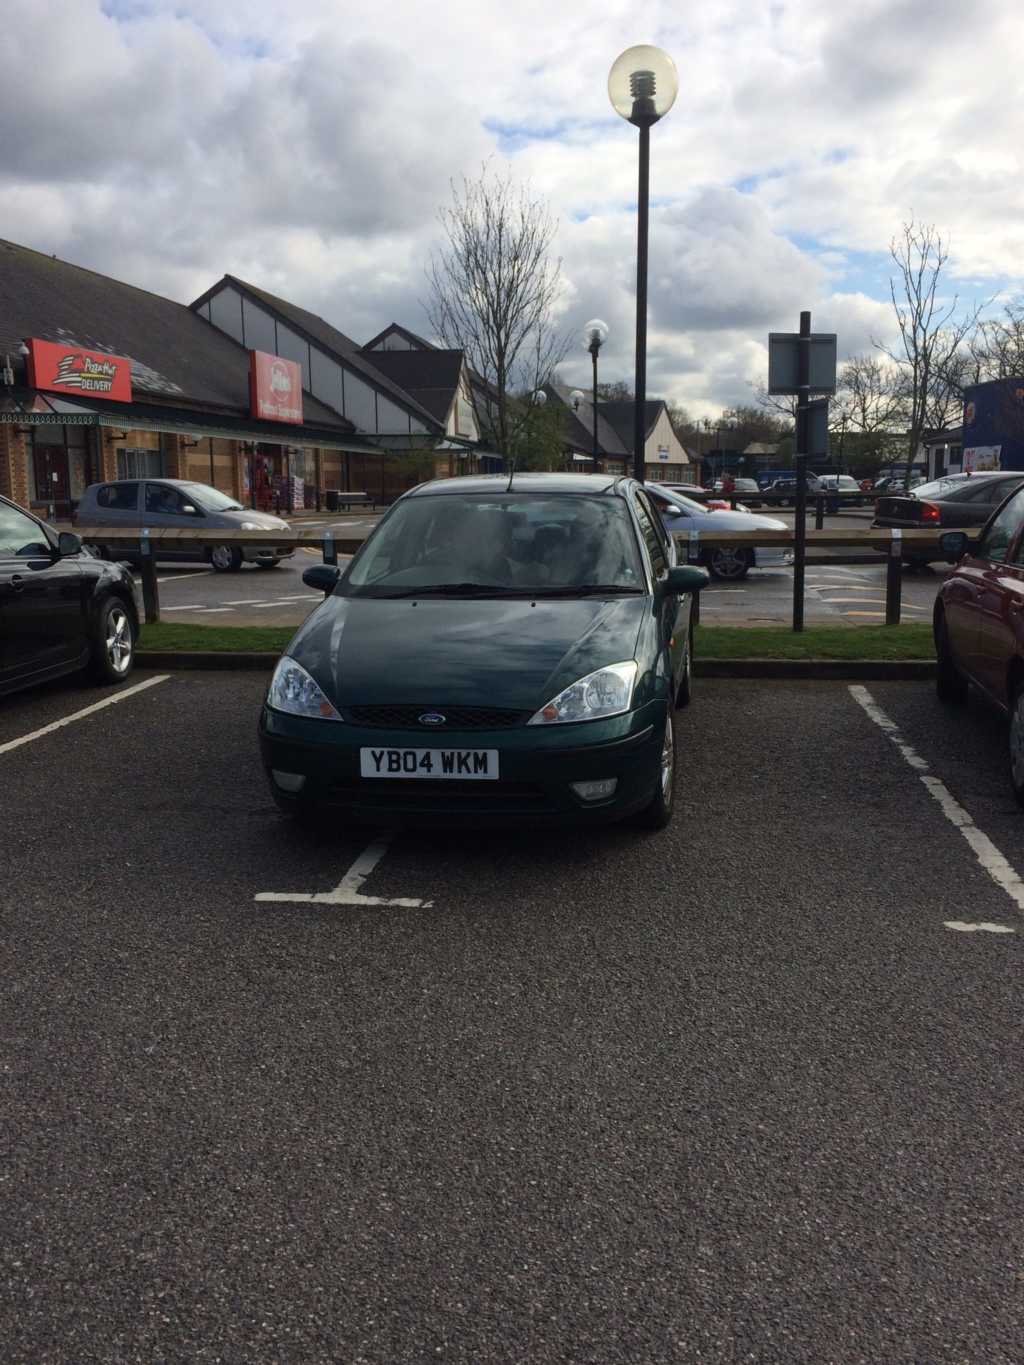 YB04 WKM is a crap parker